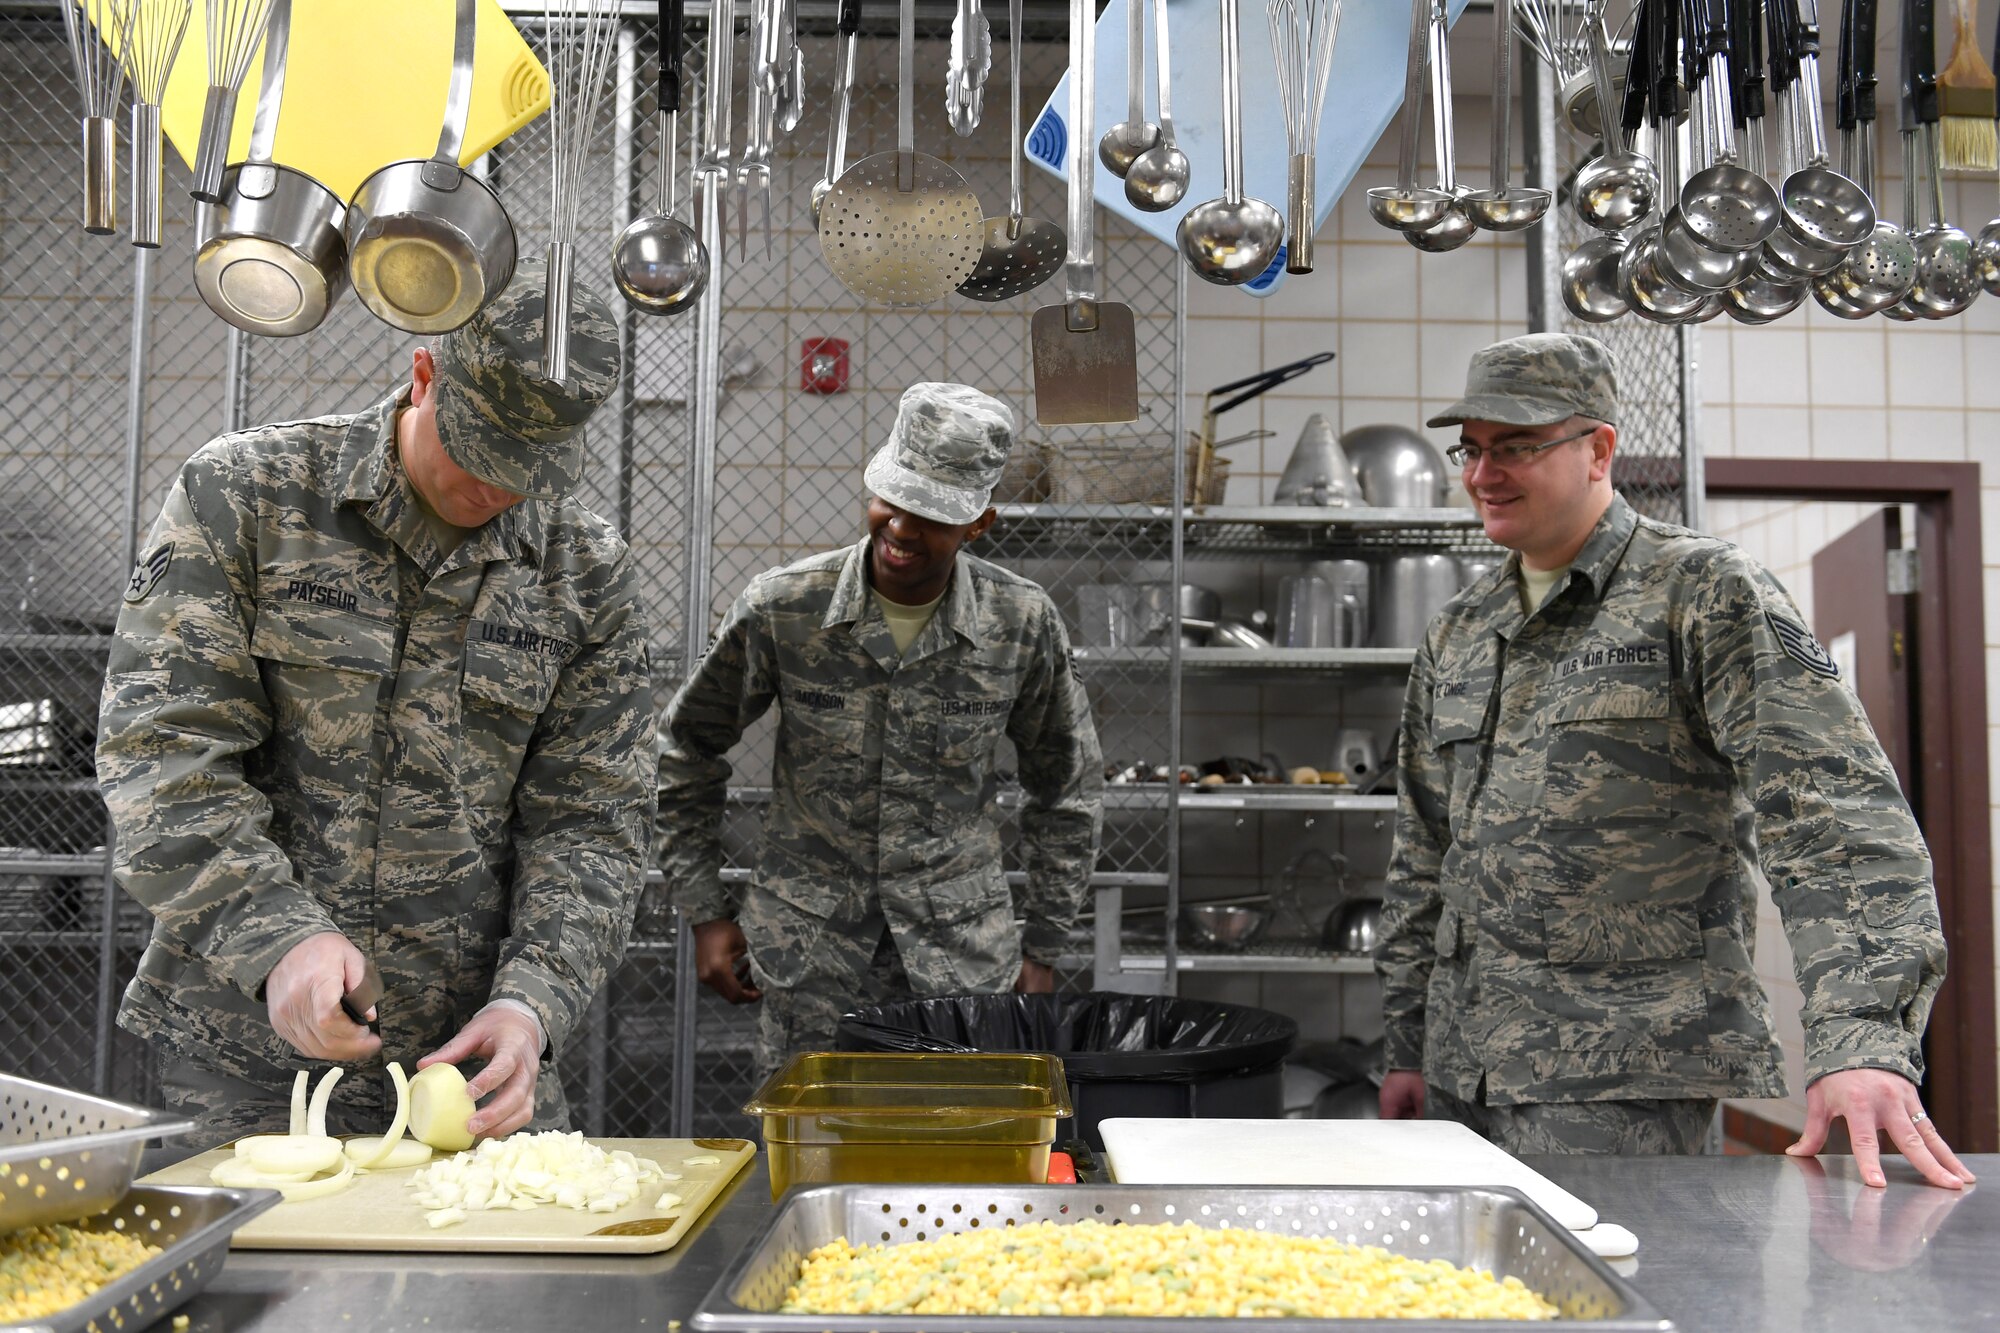 Members from both the North Carolina Air National Guard and Niagara Falls Air Reserve Station, New York, prepare lunch in the dining facility during drill weekend at the North Carolina Air National Guard Base, Charlotte Douglas International Airport, Jan. 12, 2019. Food services Airmen from the North Carolina Air National Guard train members from the Niagara Falls Air Reserve Station, New York, on full-service kitchen operations in preparation for the upcoming Air Force active duty and reserve Hennessy Award competition.